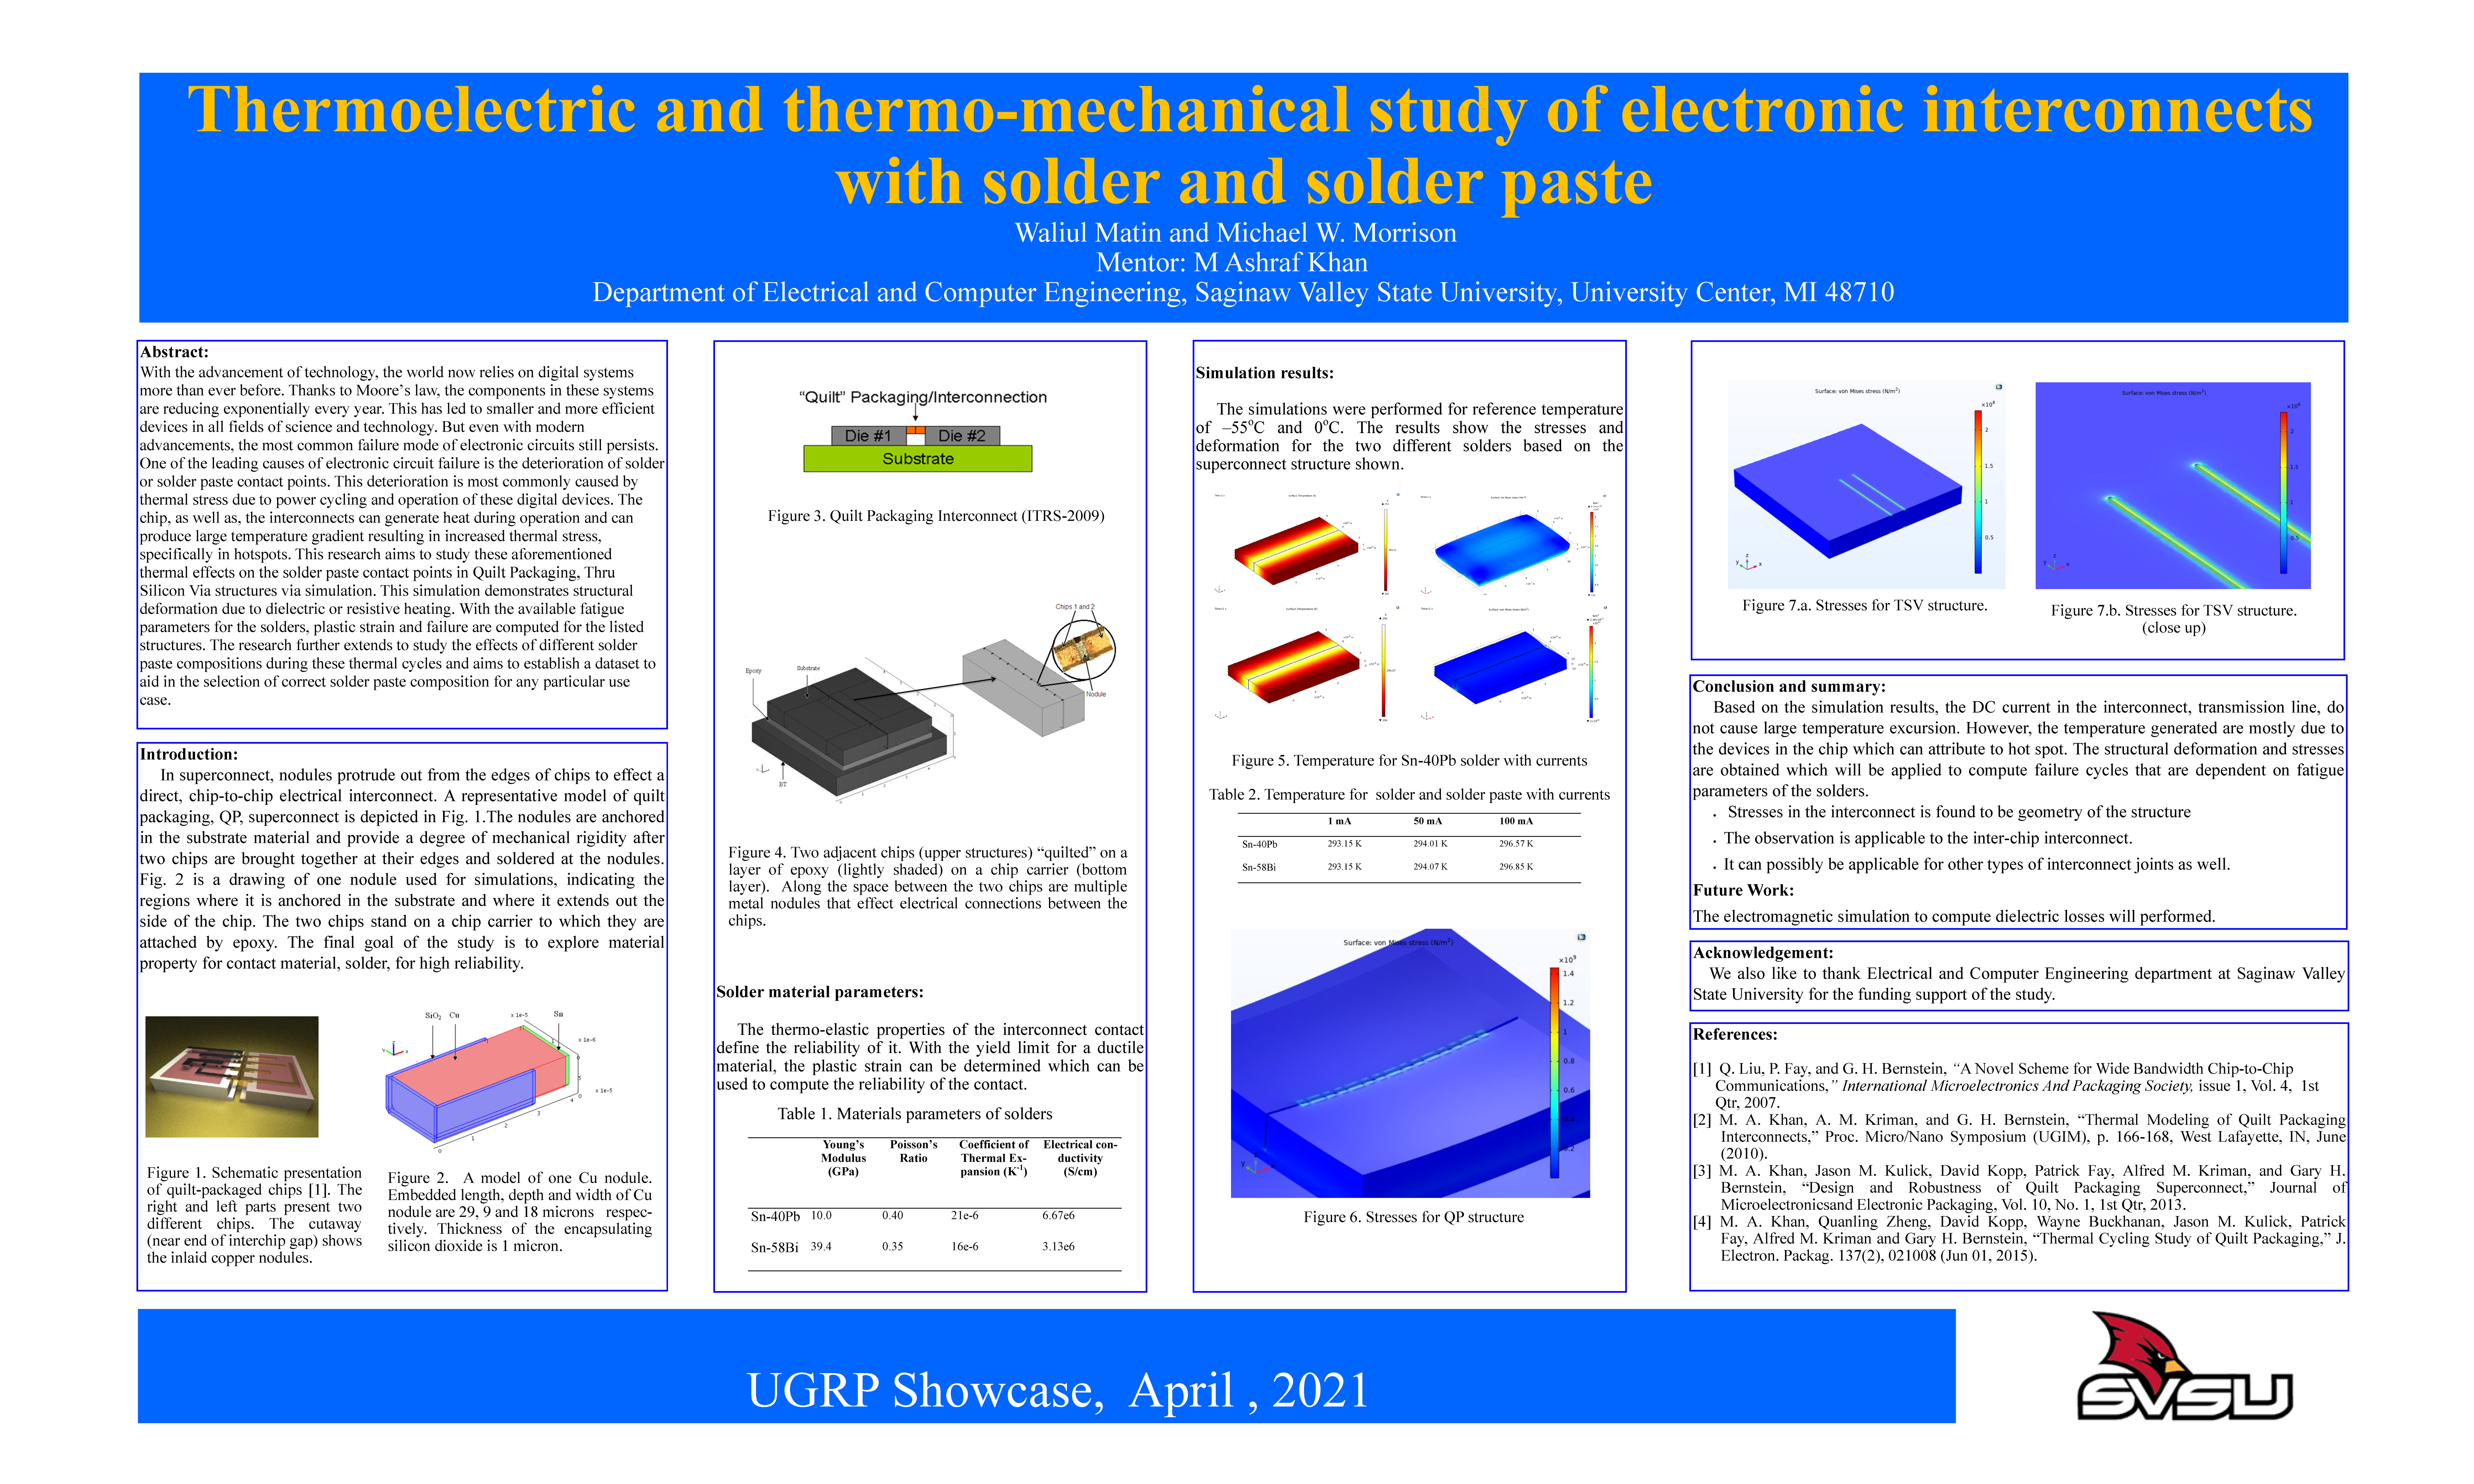 Thermoelectric and thermo-mechanical study of electronic interconnects with sold poster